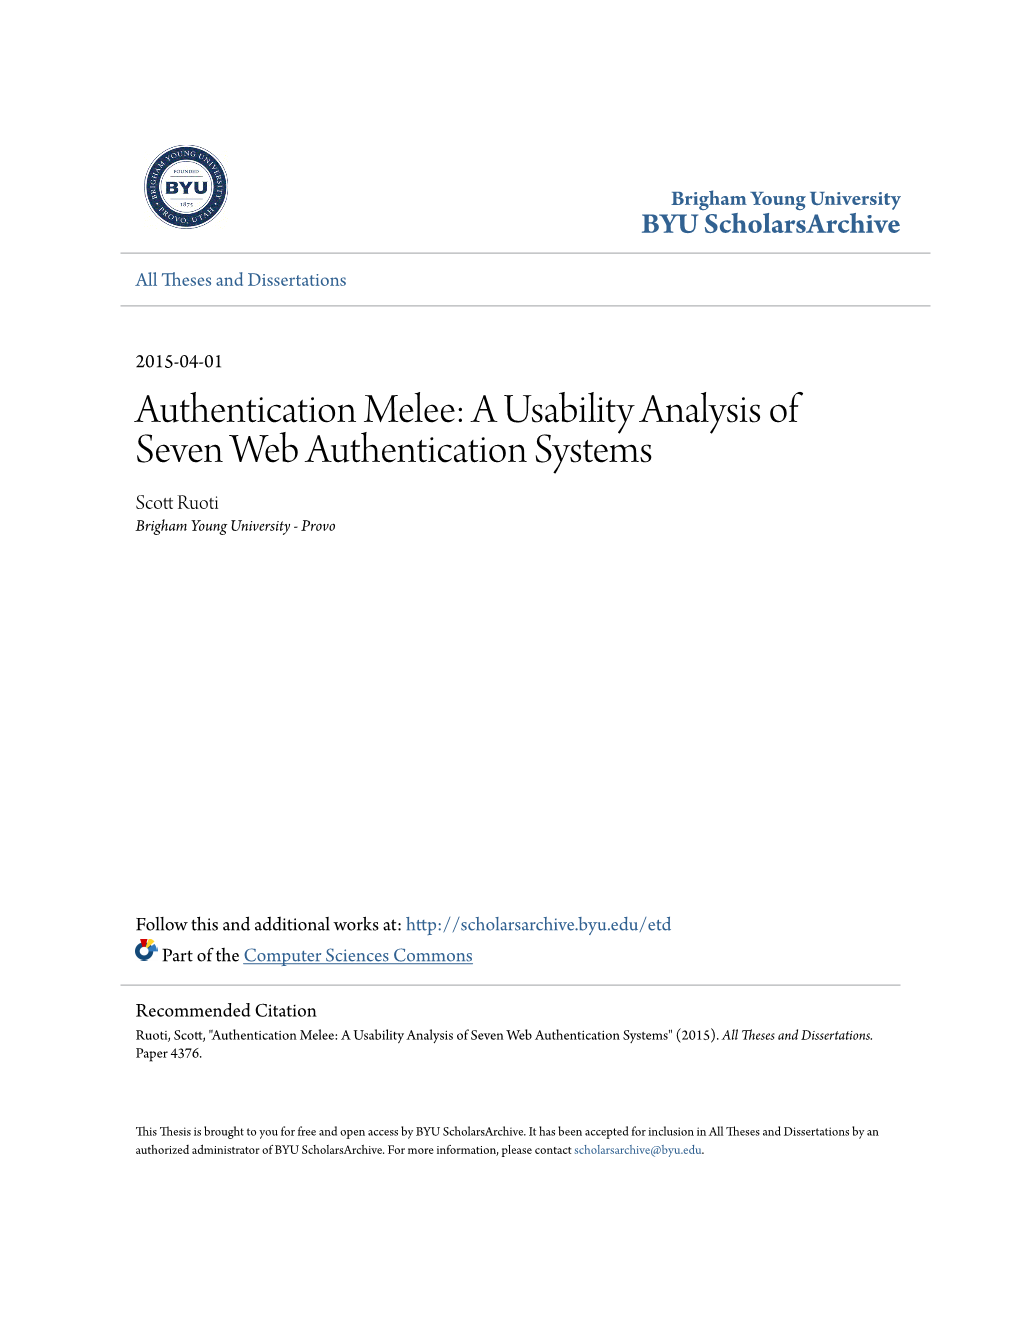 A Usability Analysis of Seven Web Authentication Systems Scott Ruoti Brigham Young University - Provo